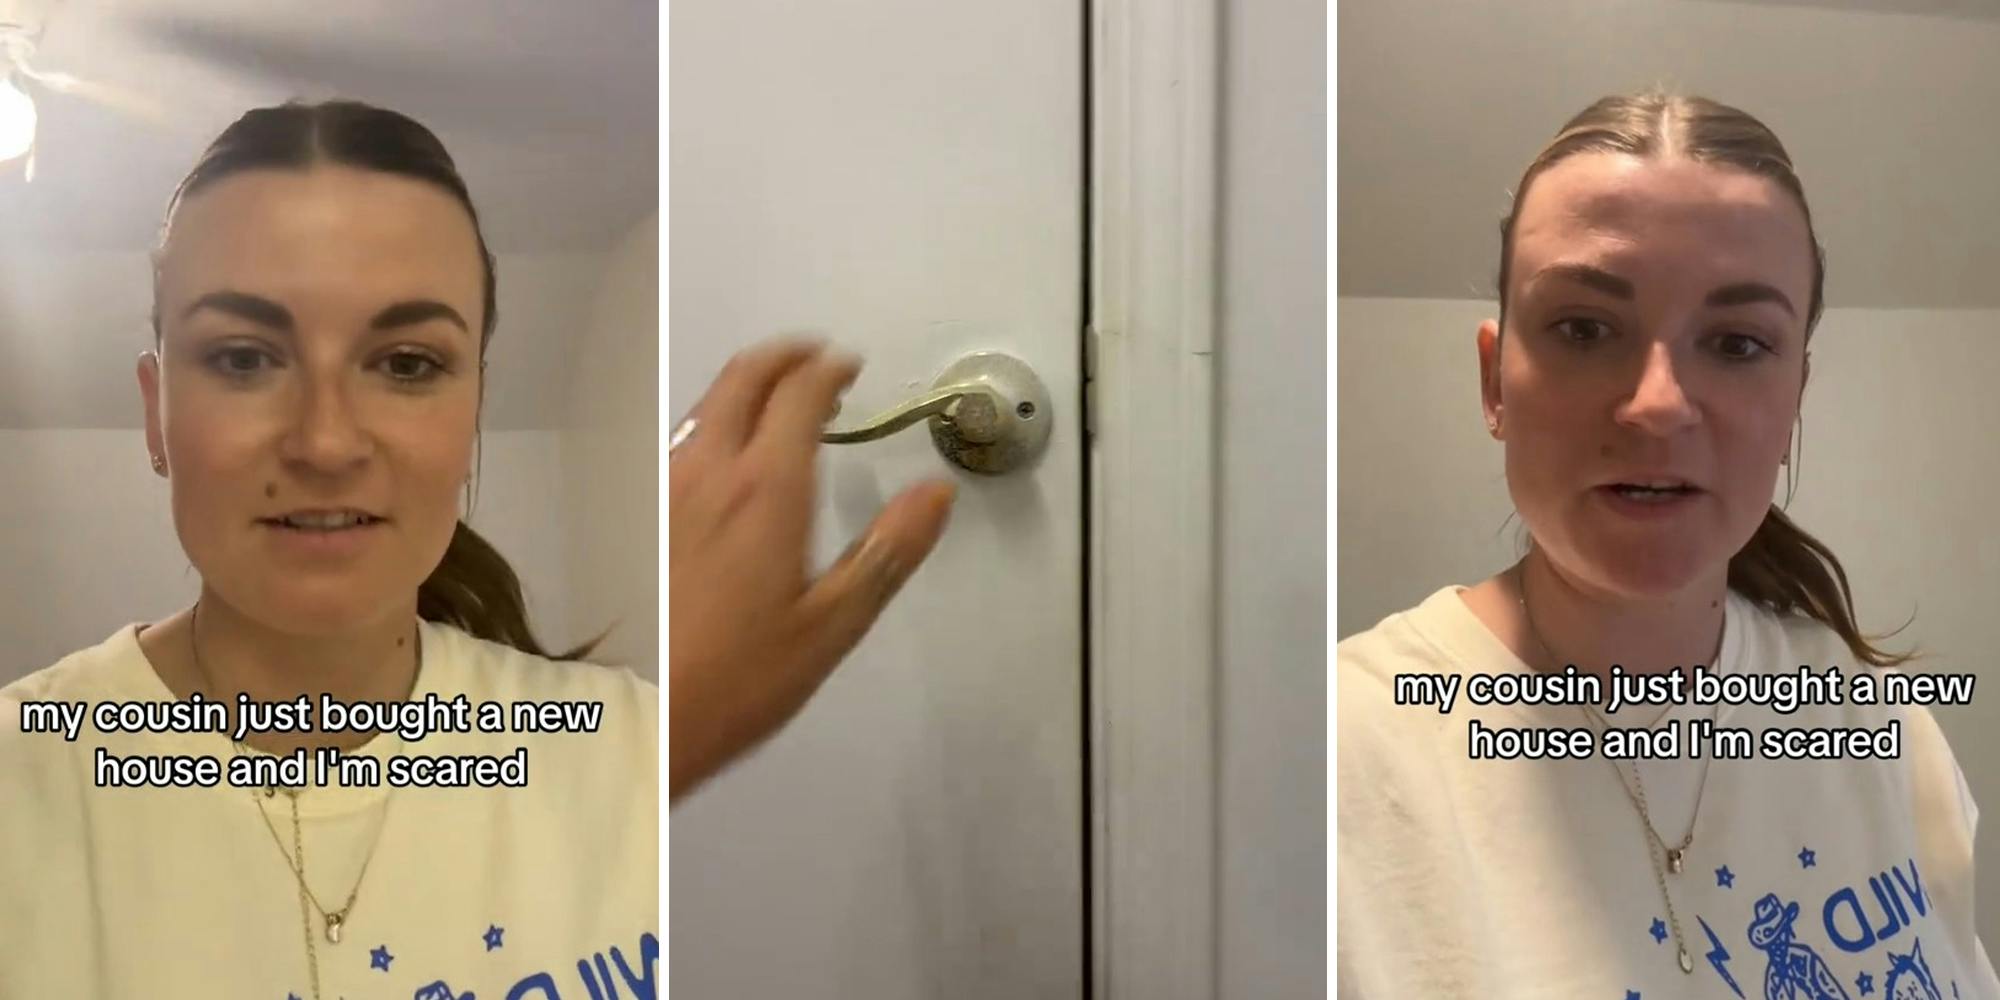 ‘I told her to padlock them’: Woman’s cousin buys new house. She’s shocked when she finds door in the closet—and opens it